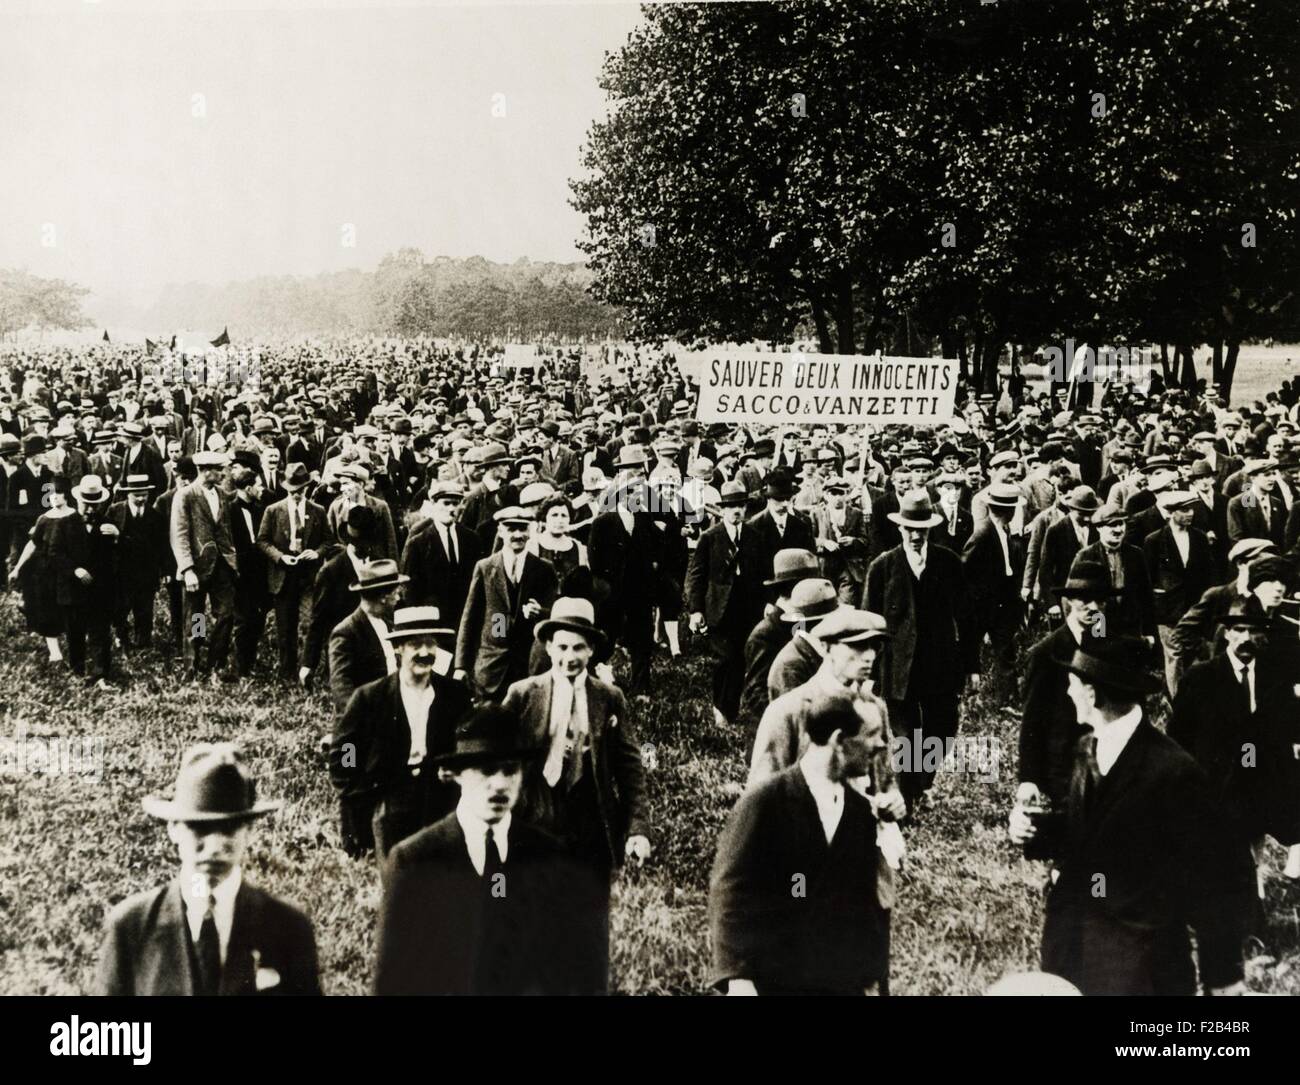 Paris sympathizers of Sacco and Vanzetti demonstrate. An immense demonstration was held in the Bois de Vincennes outside Paris by sympathizers of the two condemned Massachusetts radicals, Sacco and Vanzetti. Ca. Aug. 21, 1927. A sign reads, 'Saveur Deux Innocents, Sacco & Vanzetti'. - (CSU 2015 5 109) Stock Photo